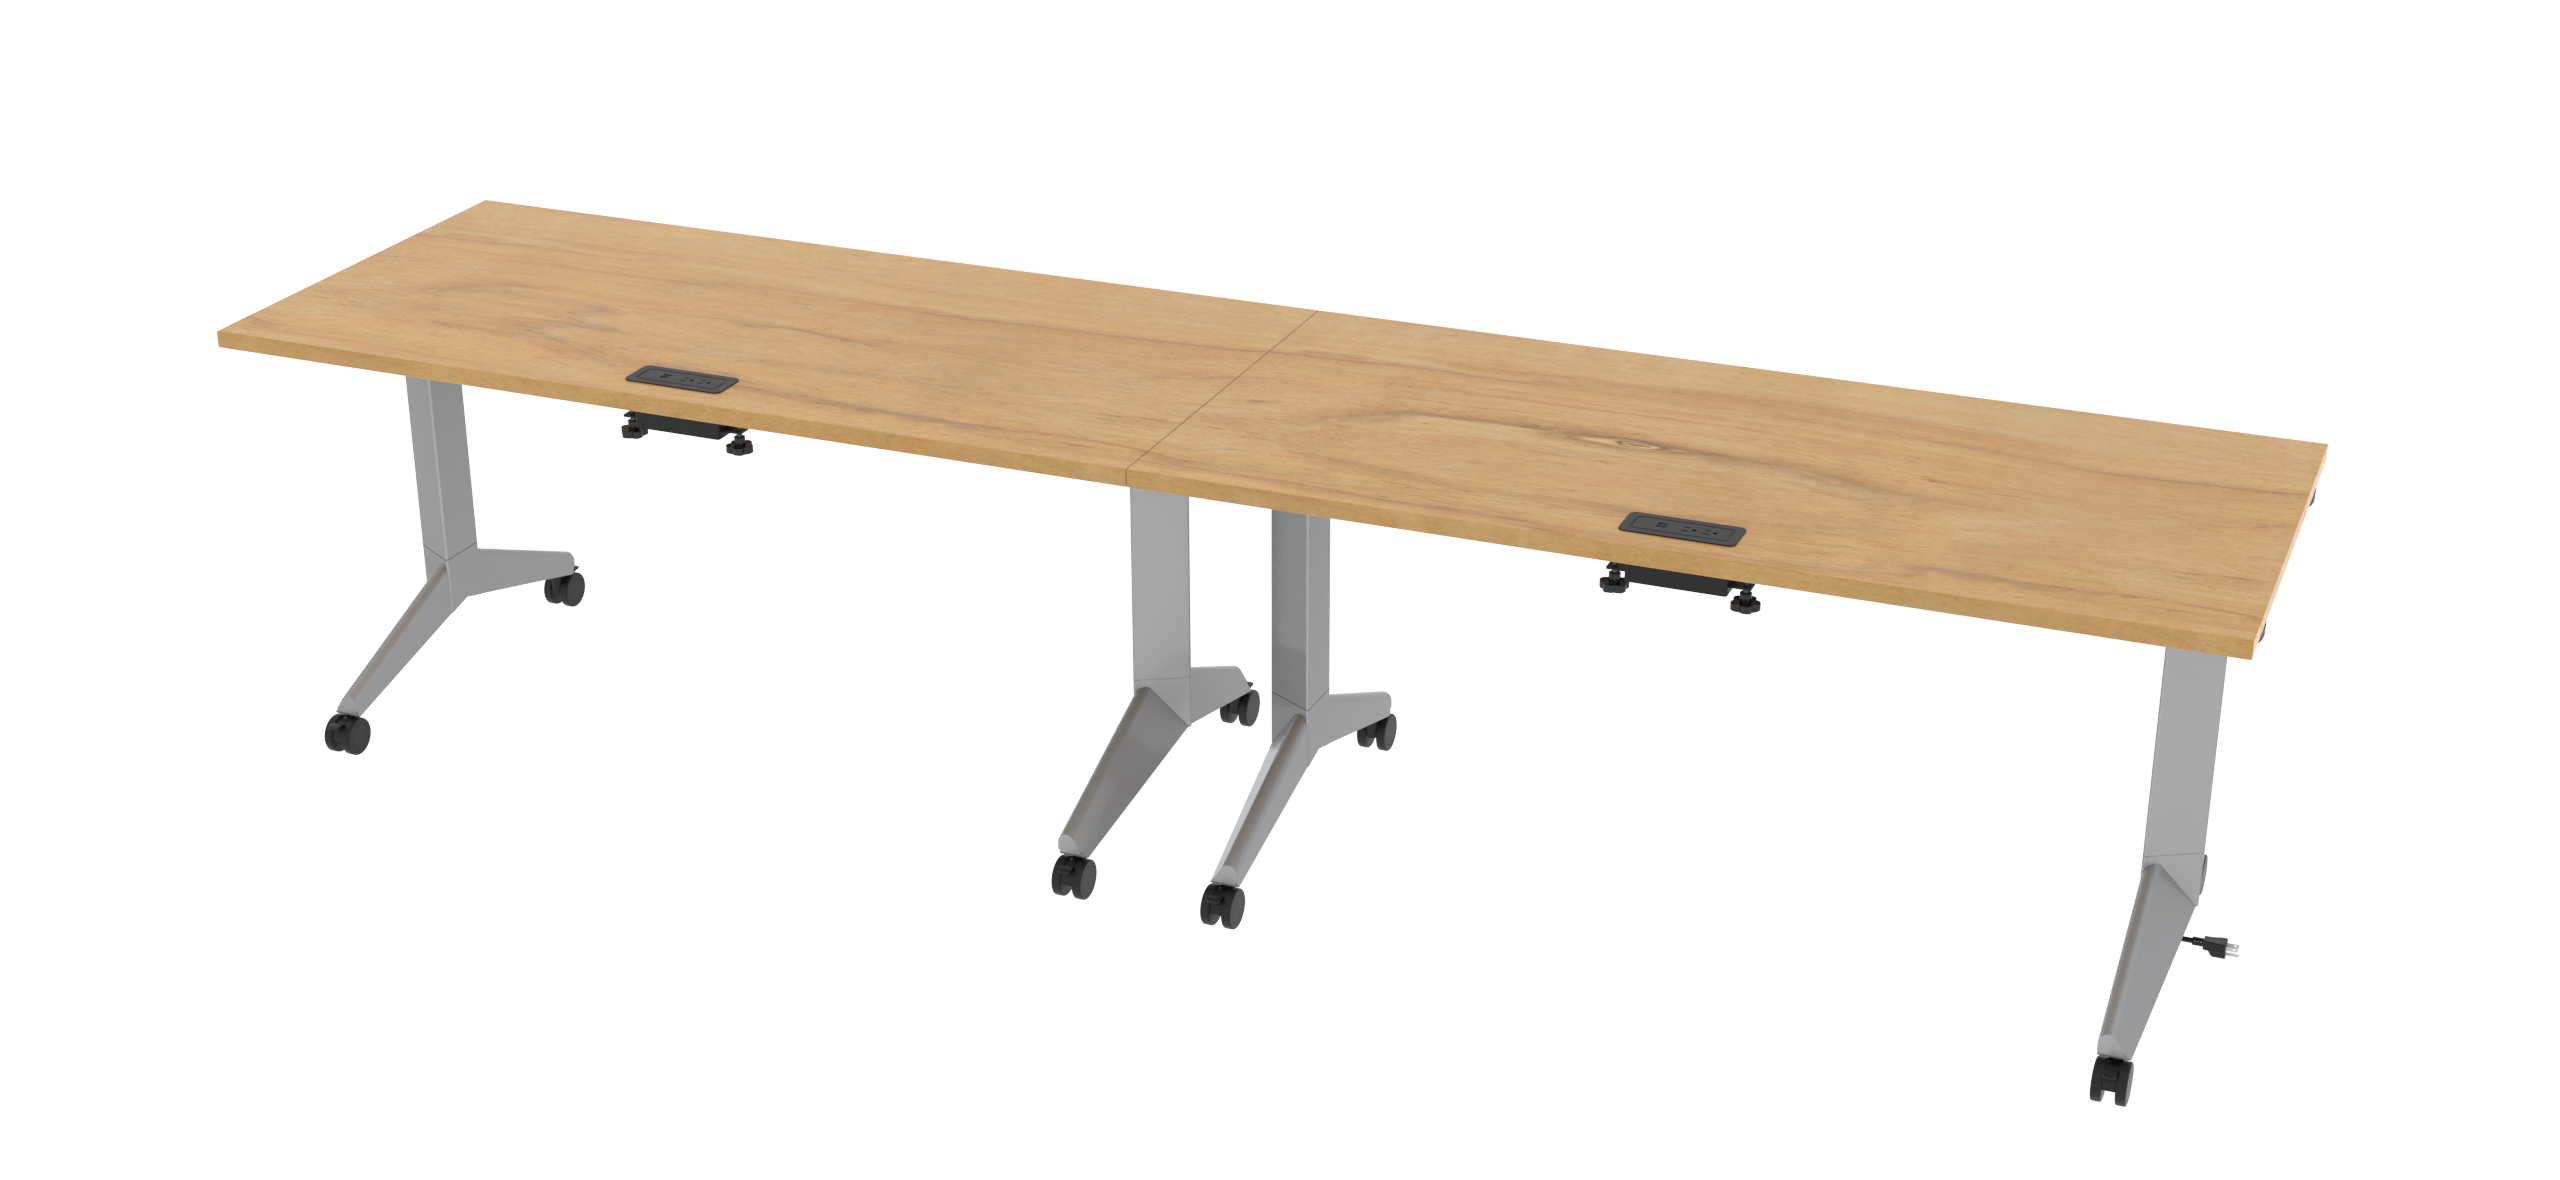 What are the advantages of Flip-top table base?